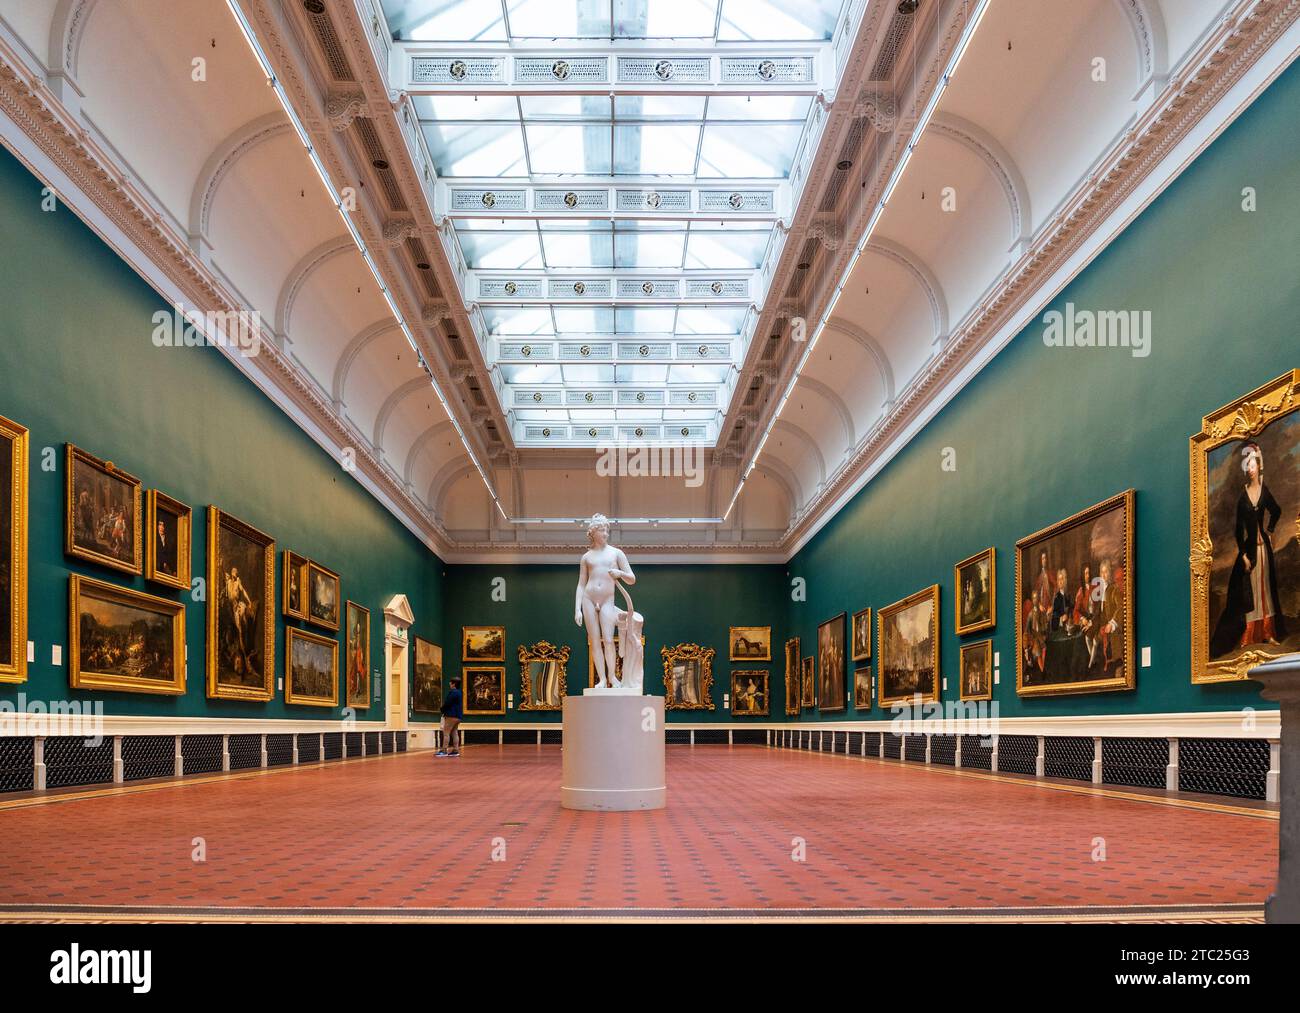 The Grand Gallery with European art from the 18th to 19th century, in the National Gallery of Ireland, Dublin city center, Ireland Stock Photo